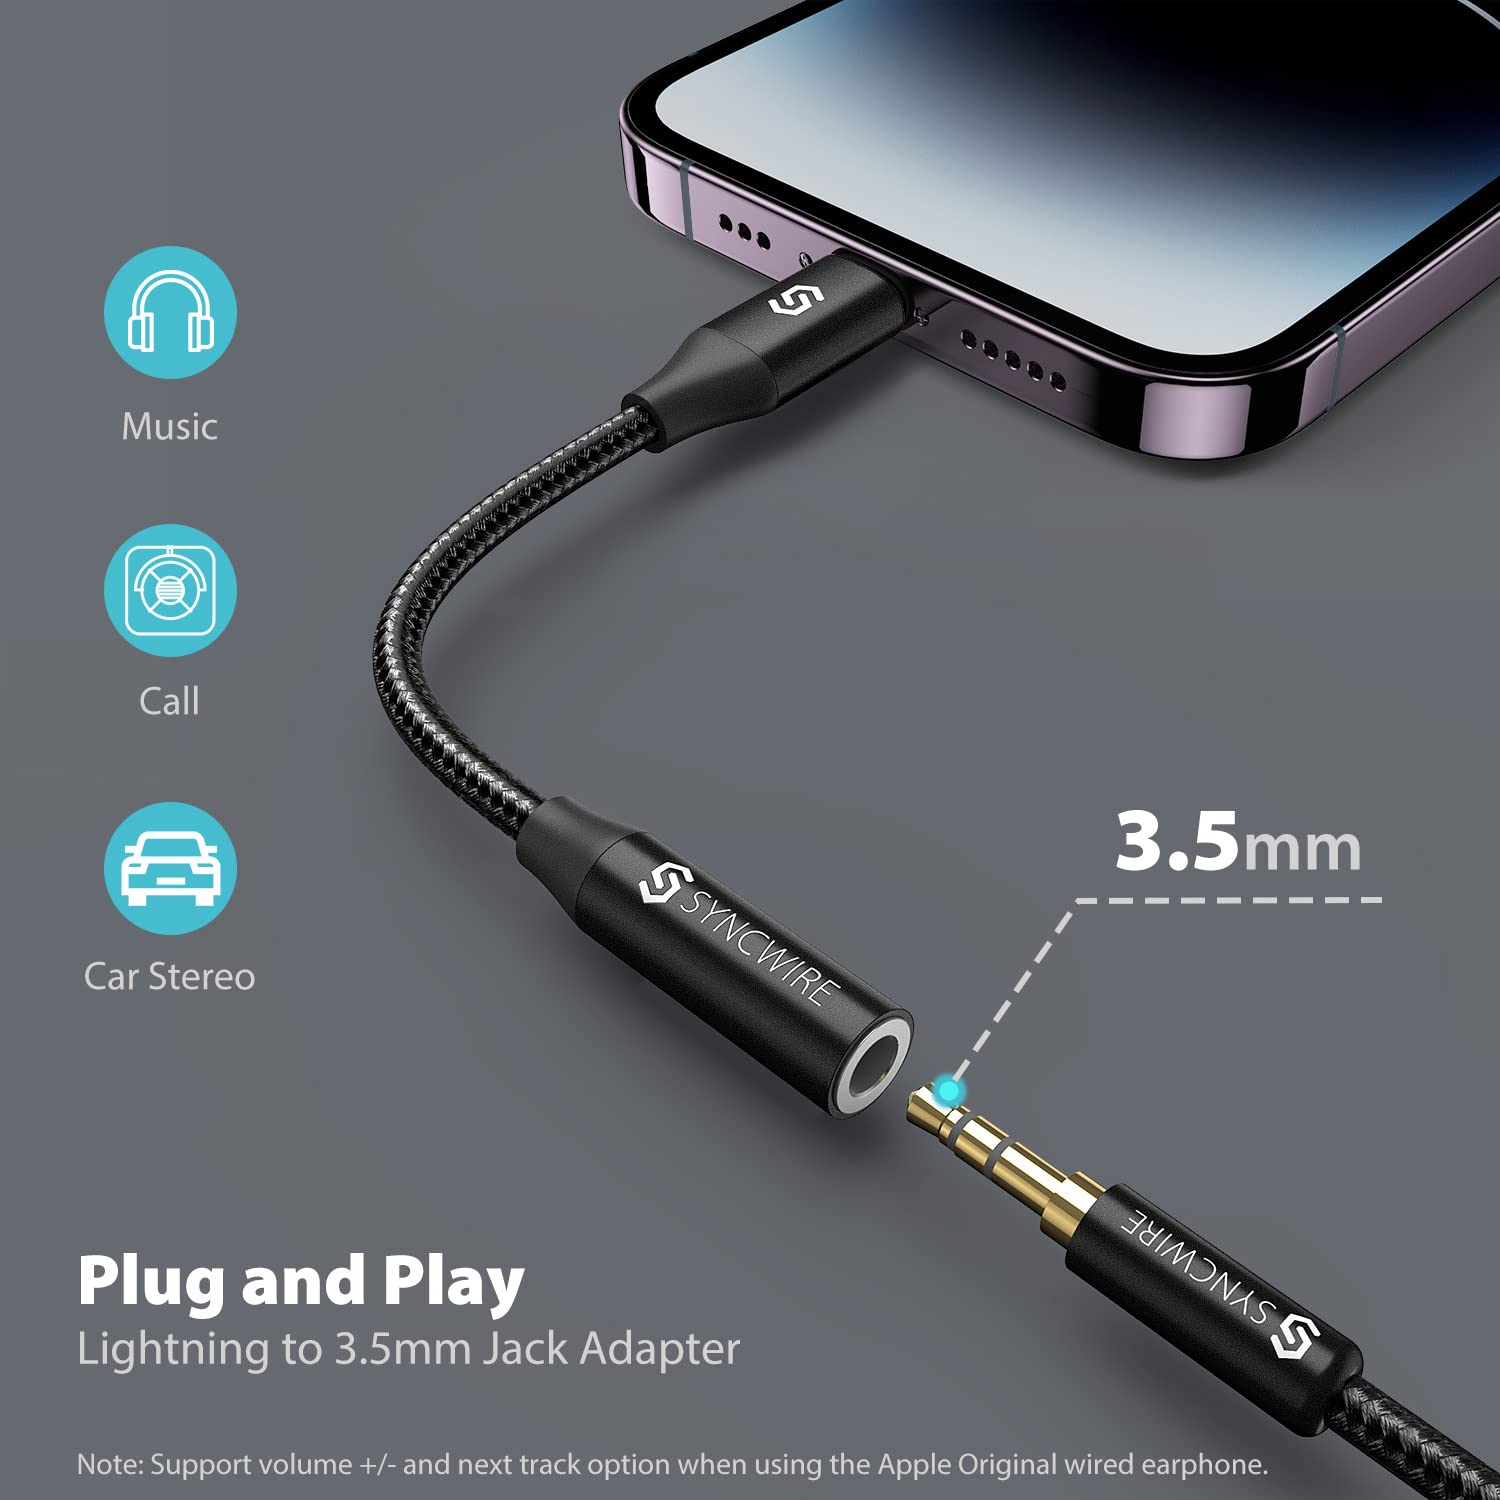 [Apple MFI Certified] iPhone Headphone Adapter, Syncwire iPhone Aux Jack Adapter, Lightning to 3.5mm Dongle for iPhone 14/13/12/11 Pro Max/Pro/Plus/Mini/XR/XS/8/7 Plus-Black 10cm